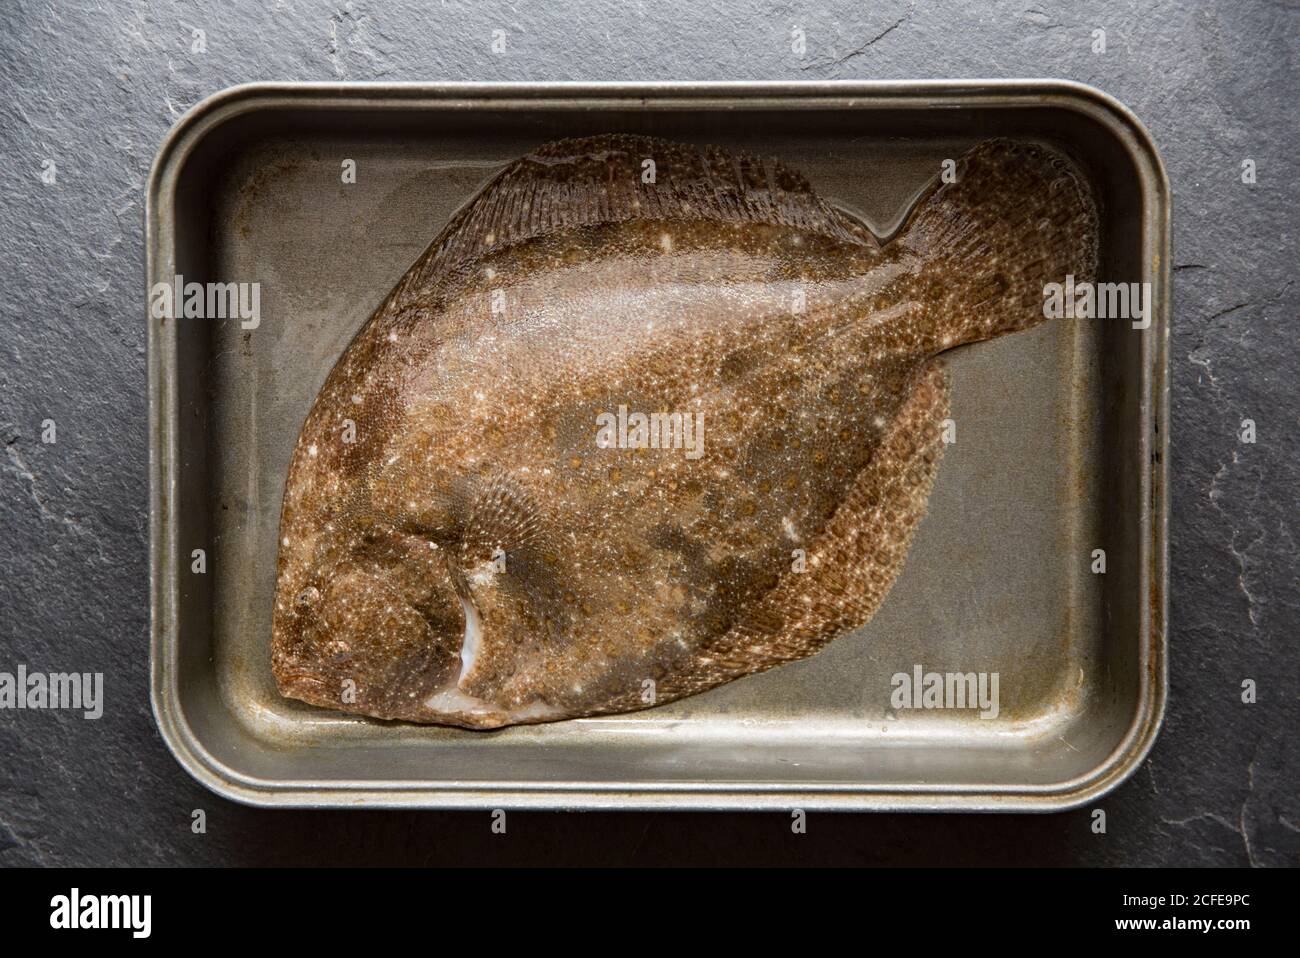 A whole raw, uncooked brill, Scophthalmus rhombus, that was caught in the English Channel. Devon England UK GB Stock Photo